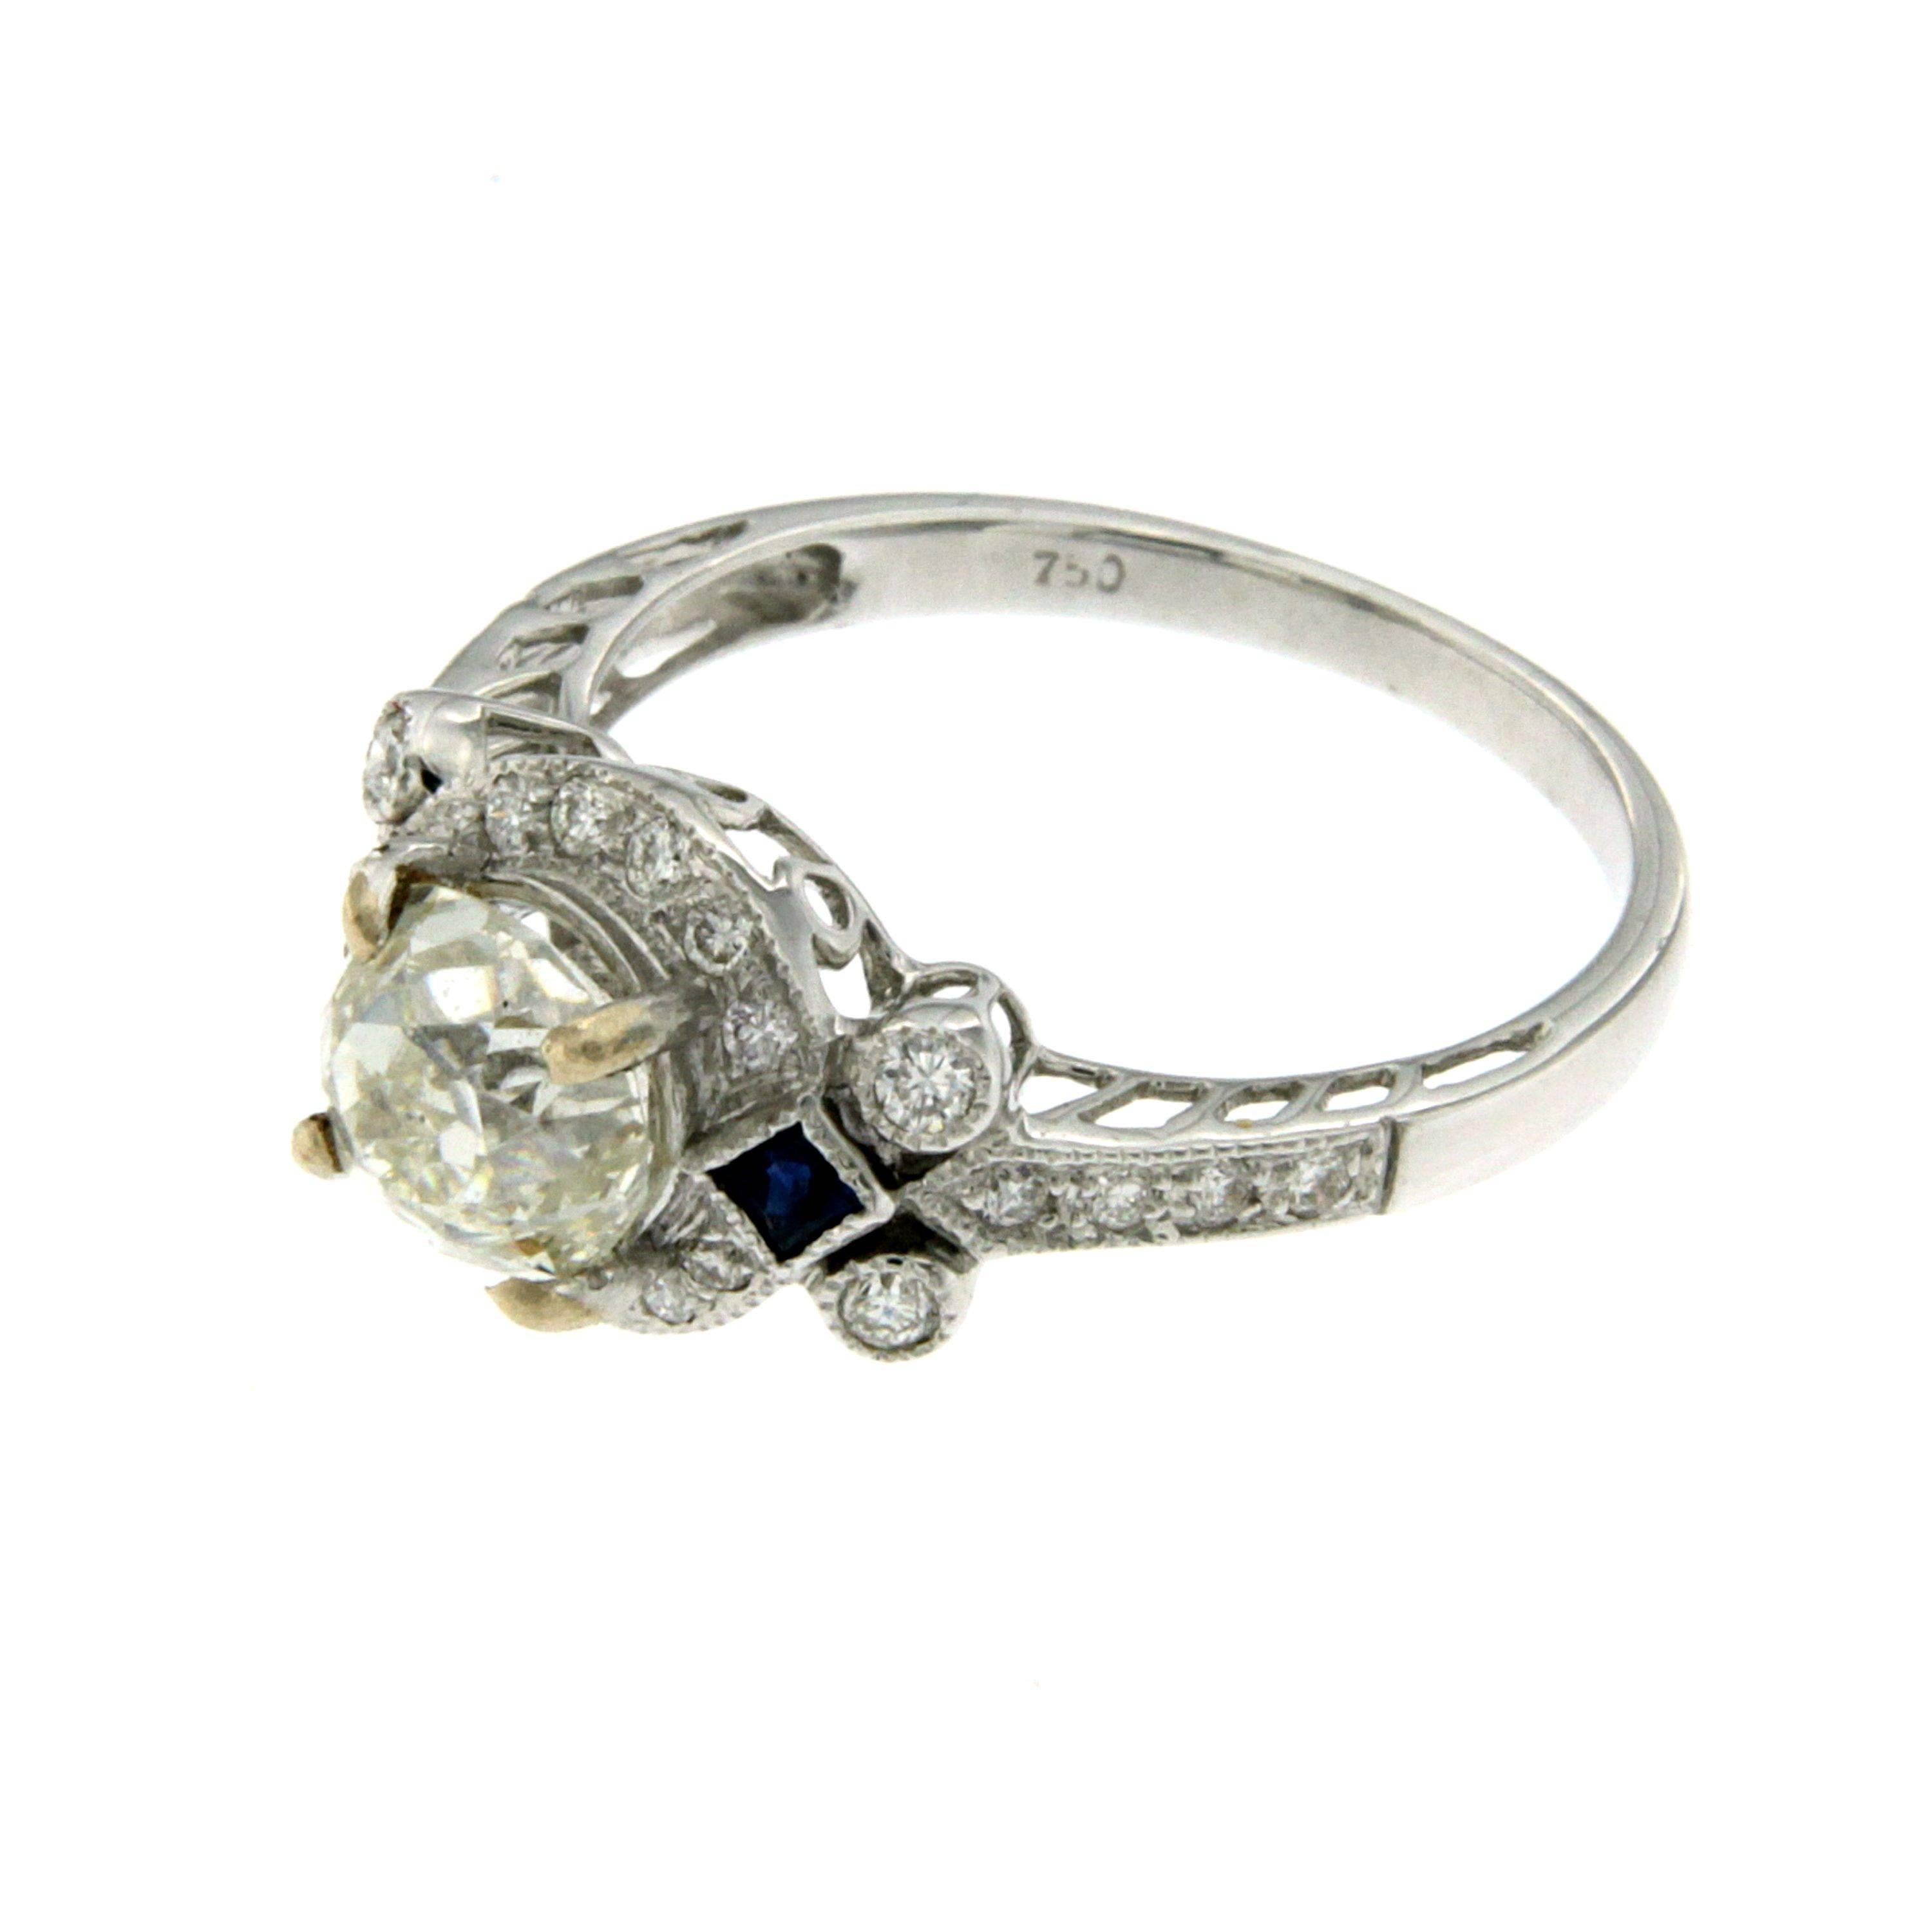 An Antique Art Deco 18k Gold Diamond & Sapphire Ring featuring a stunning 1.36ct. old mine cut Diamond graded I color VS2 clarity, it is surrounded by 24 colorless diamonds weighing 0.26ct. . There are also two 0.10 carat briolette cut Sapphires